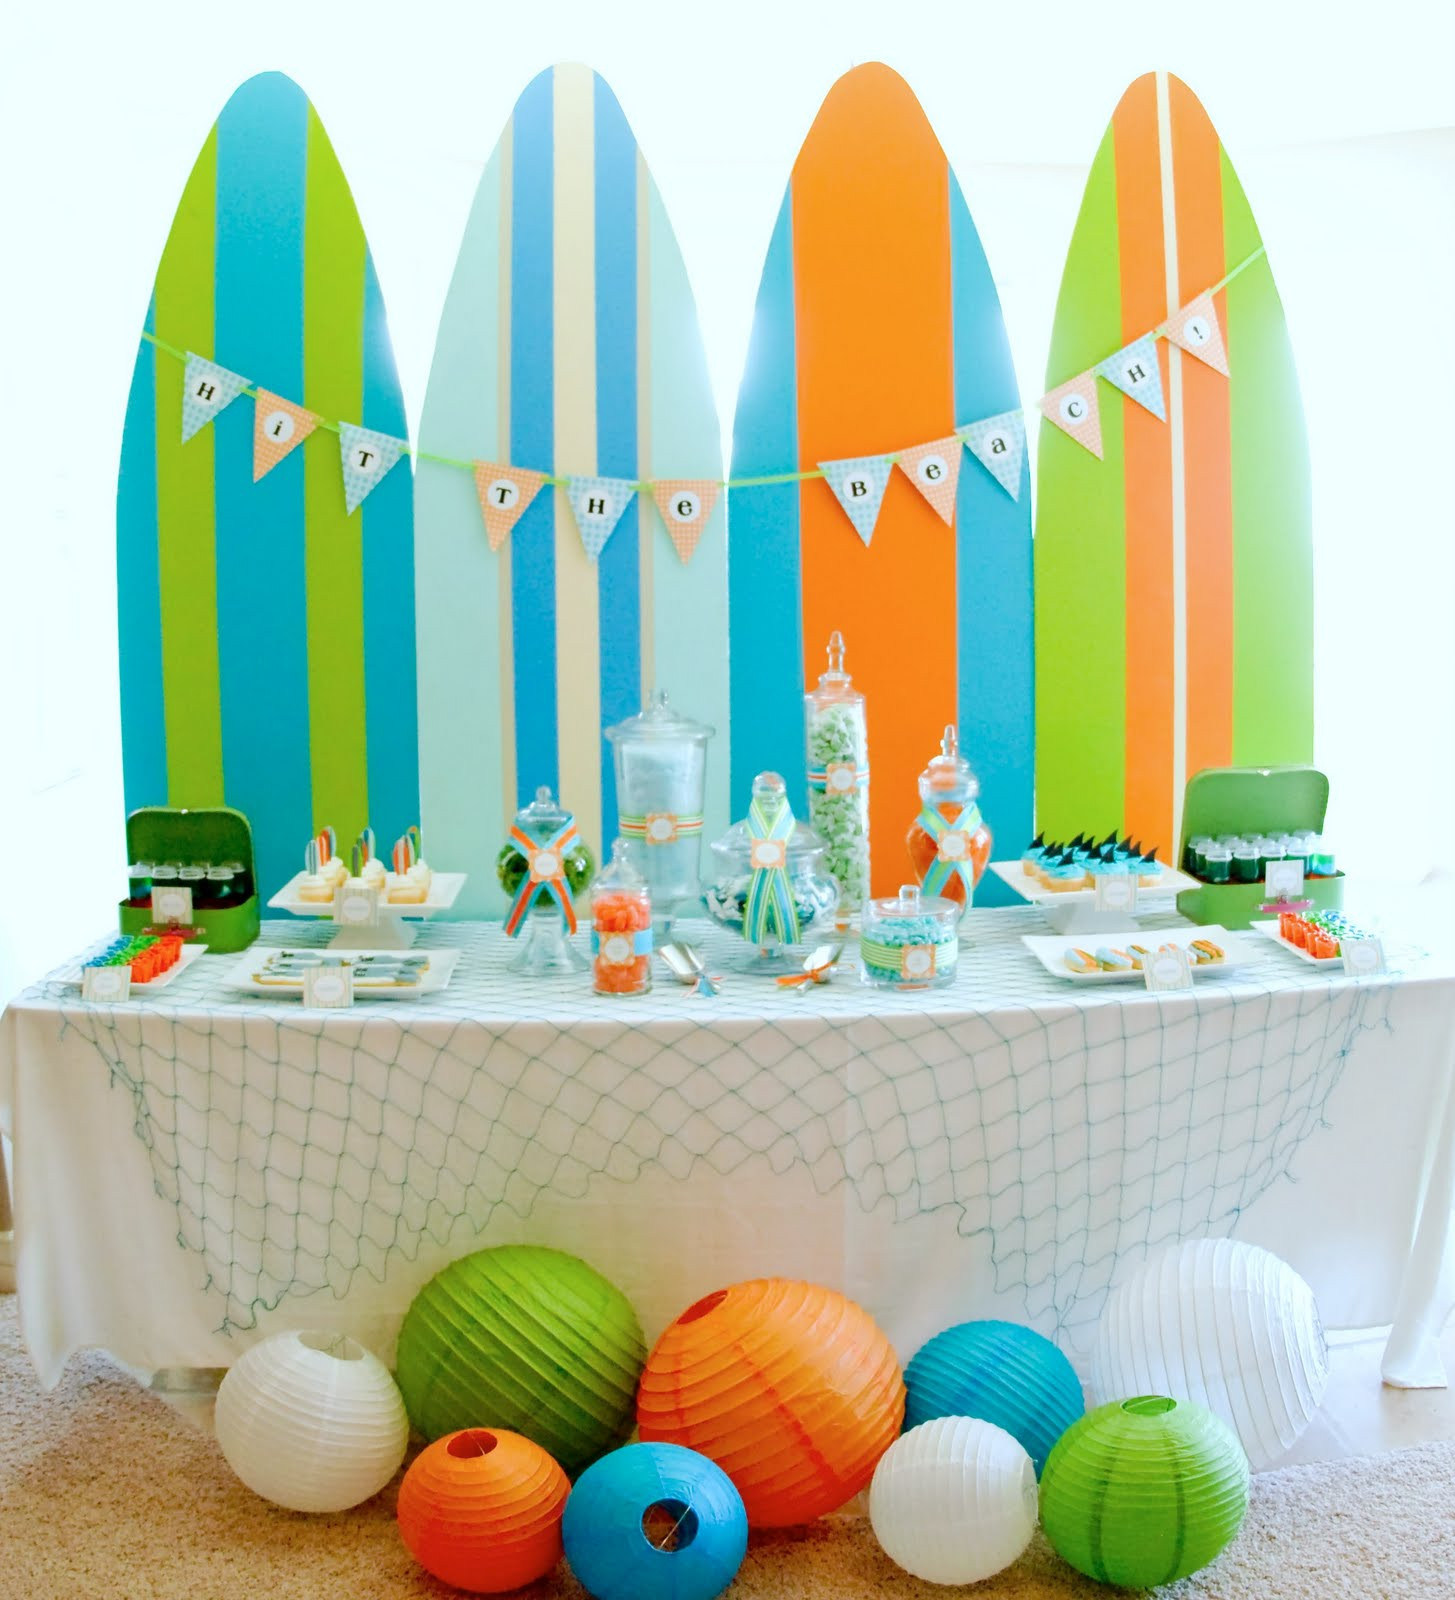 Summer Bday Party Ideas
 Kara s Party Ideas Surf s Up Summer Pool Party